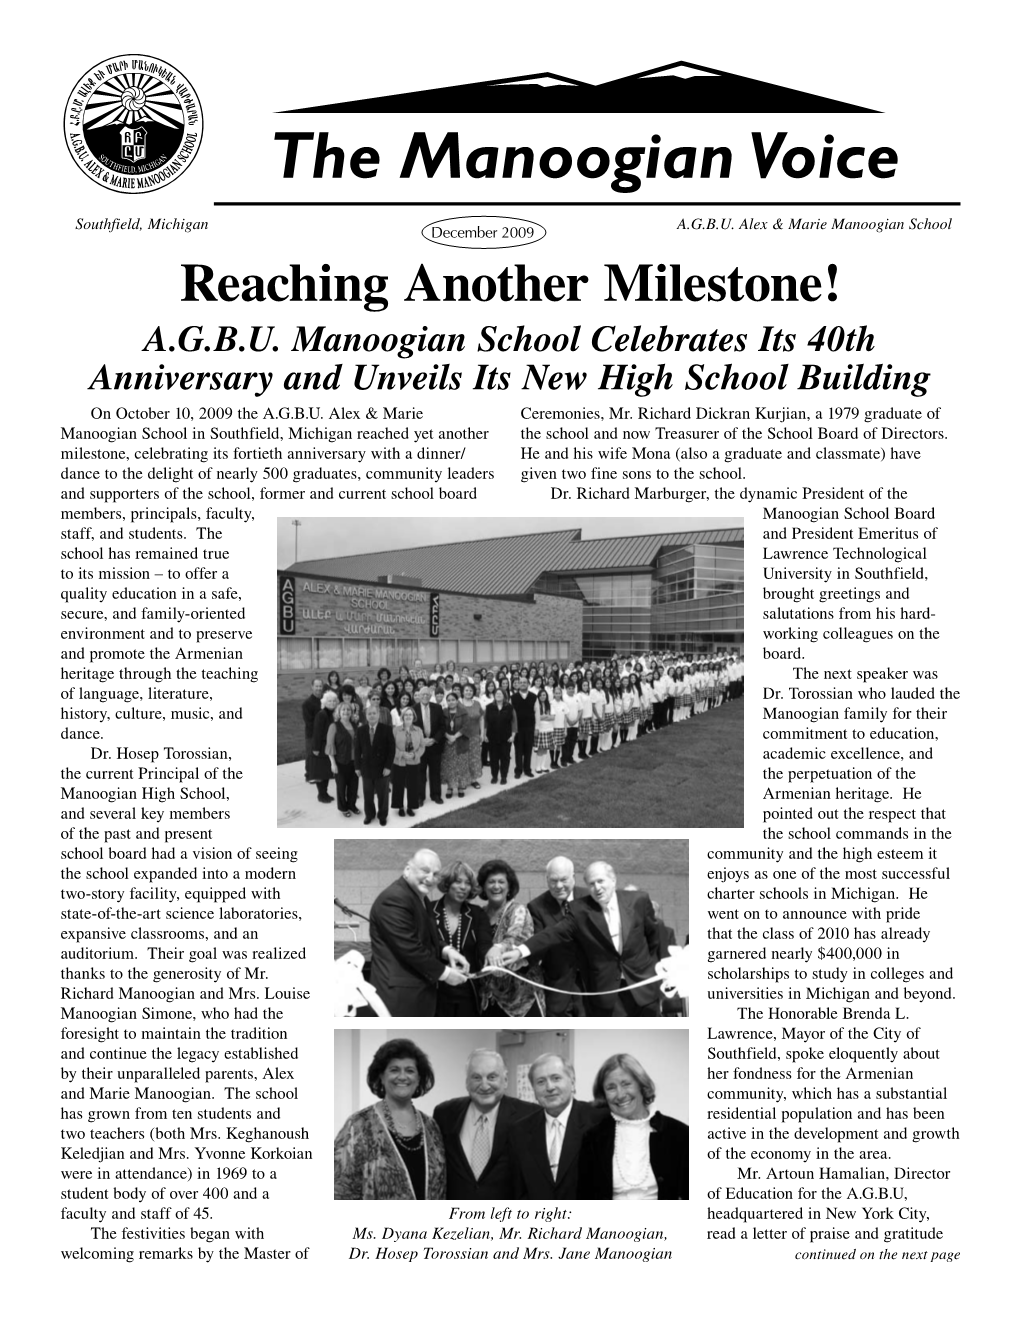 Manoogian Voice